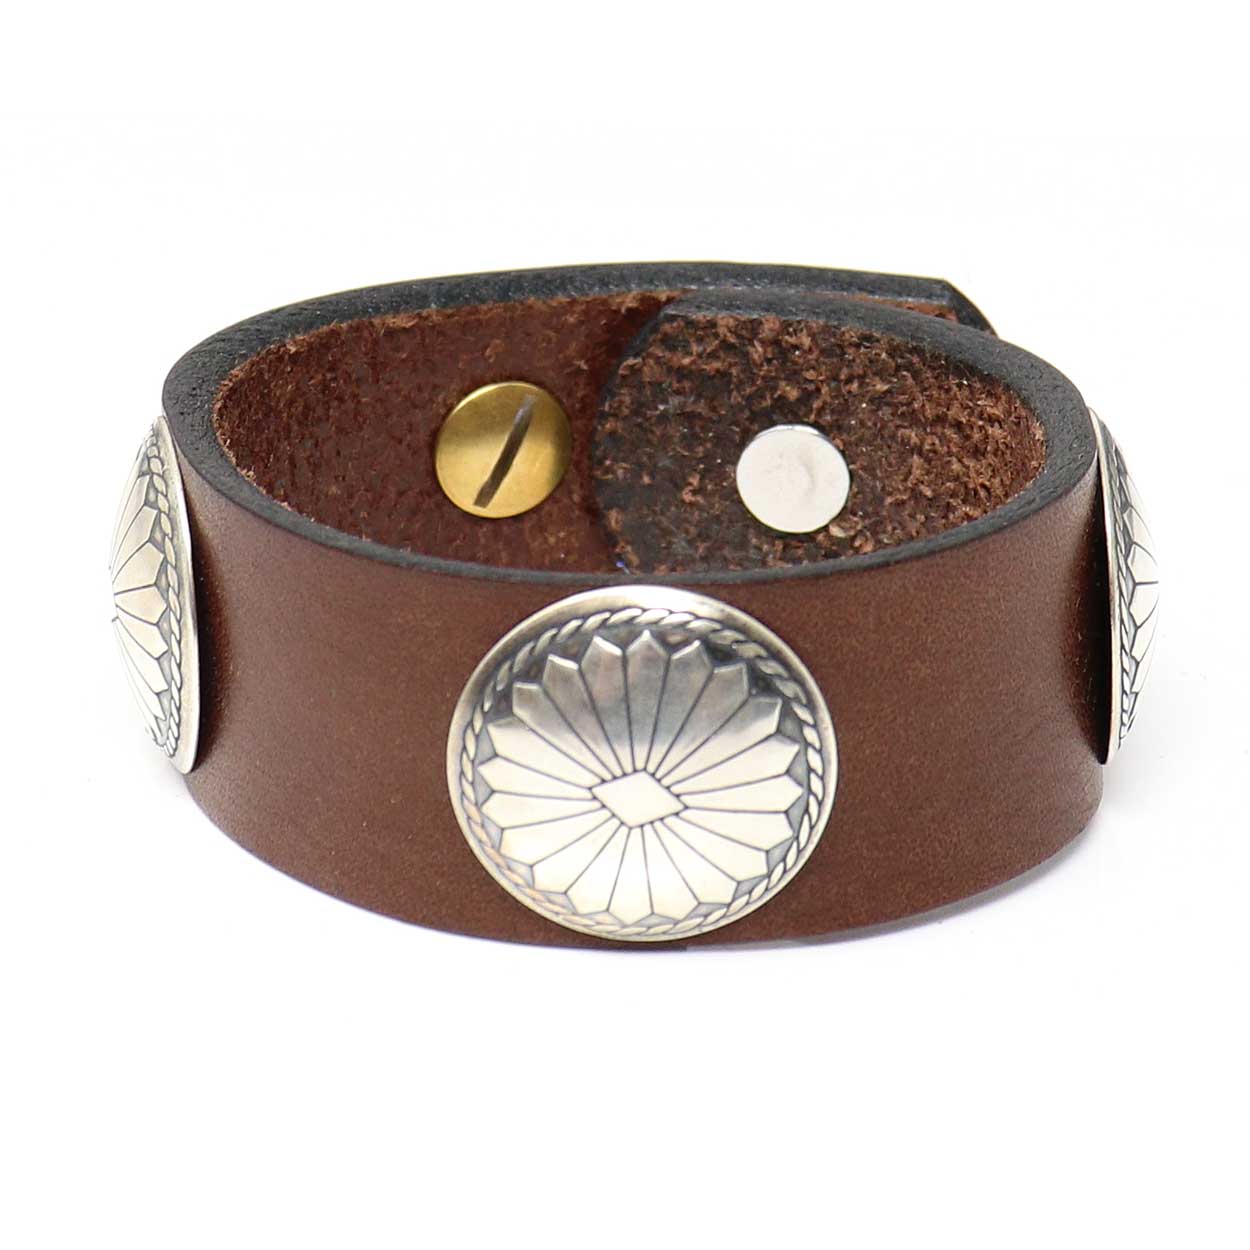 Our Silver Concho Leather Bracelet by Ingalls